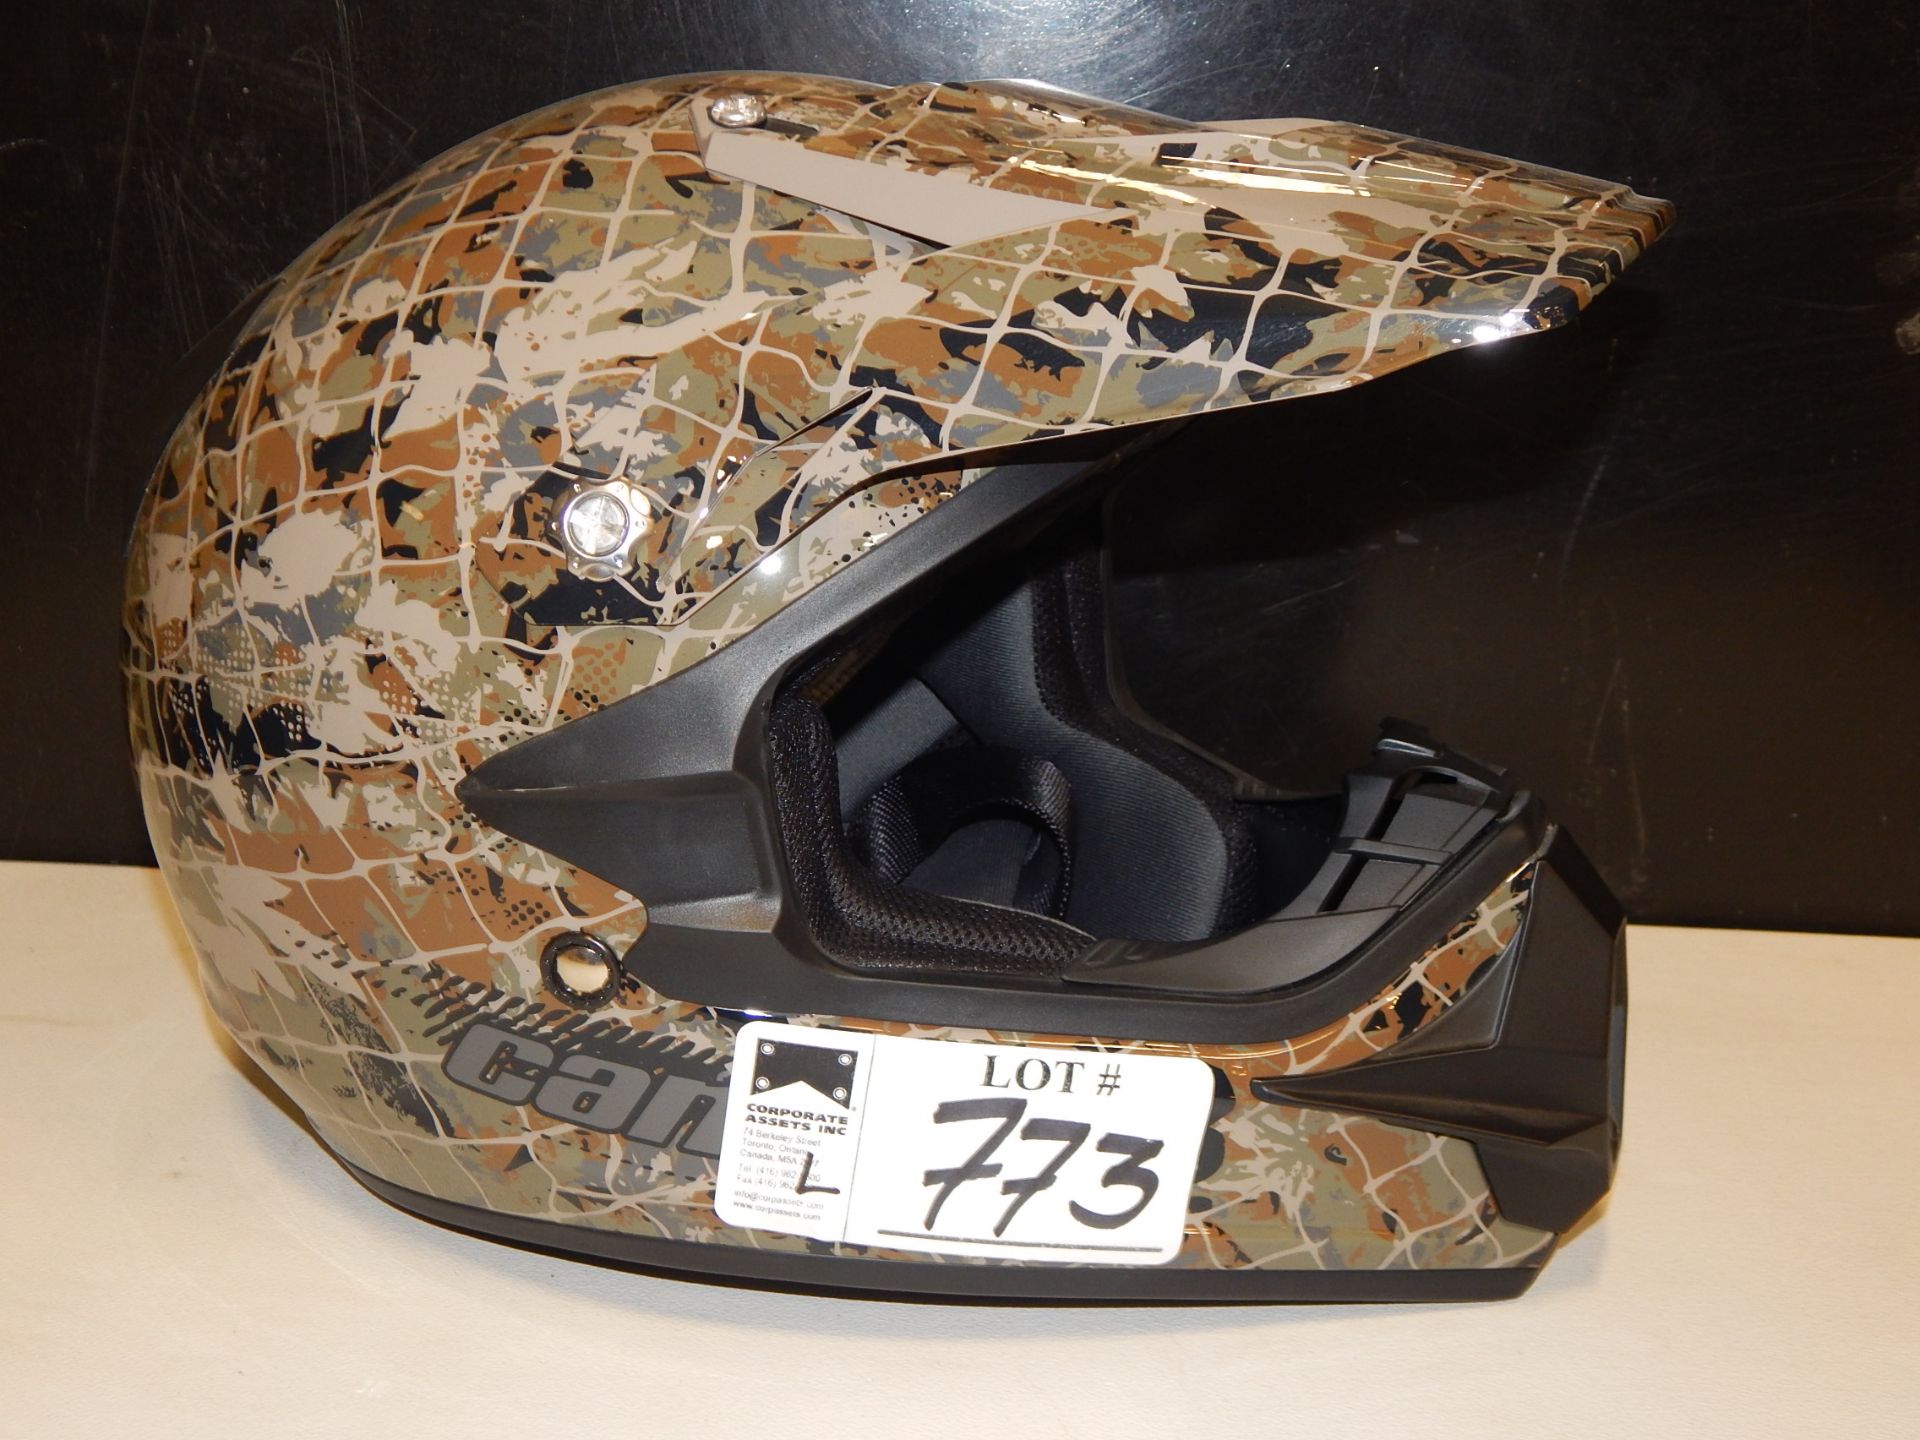 CASQUE CAN AM TAILLE G / CAN AM HELMET SIZE L